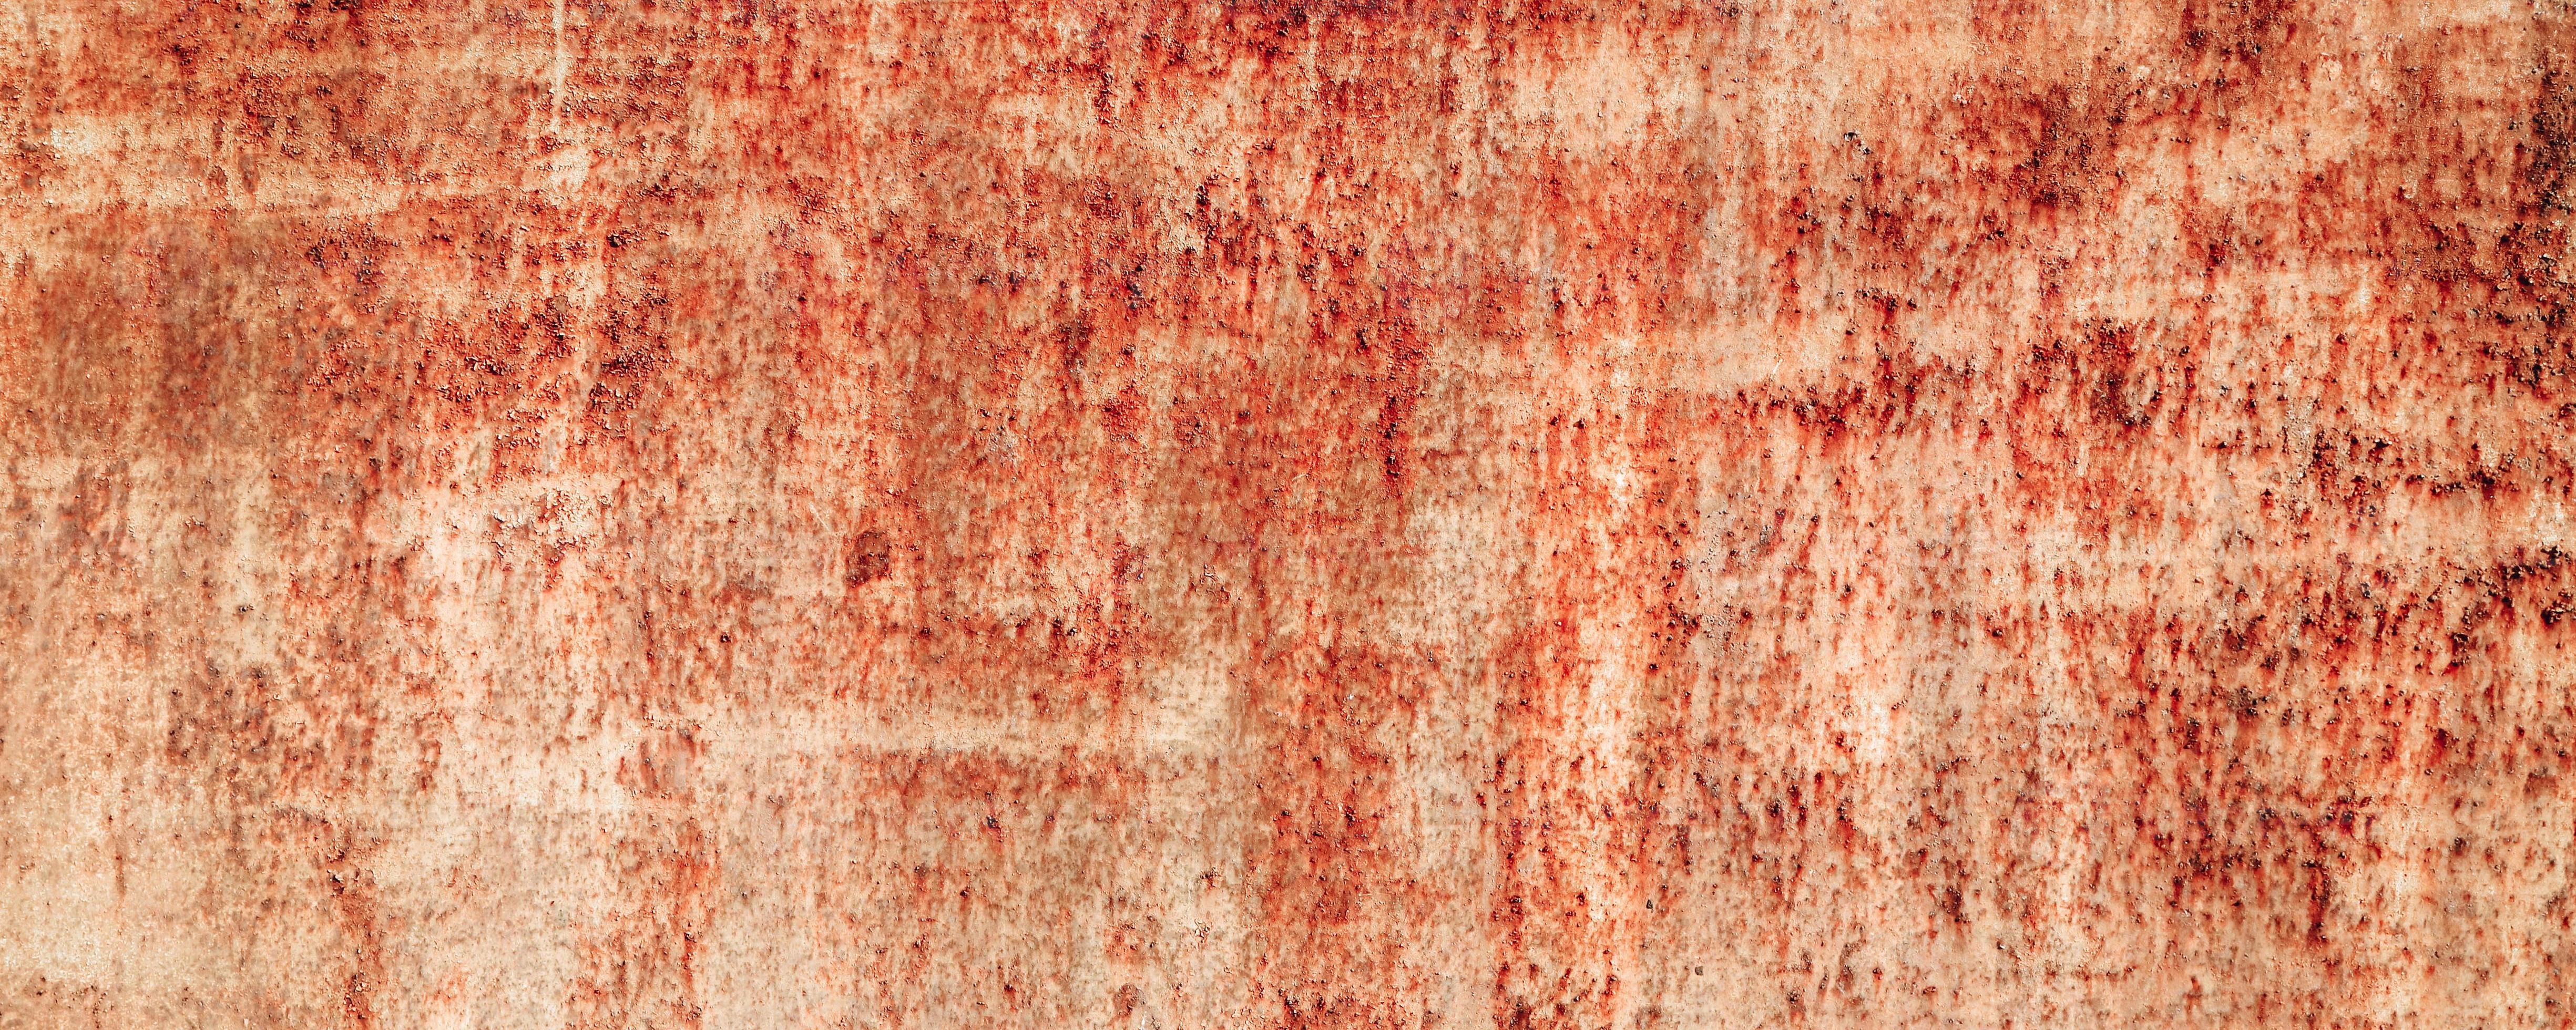 Abstract grunge rusty metal iron texture pattern background. Long website  header or banner format. 6395338 Stock Photo at Vecteezy